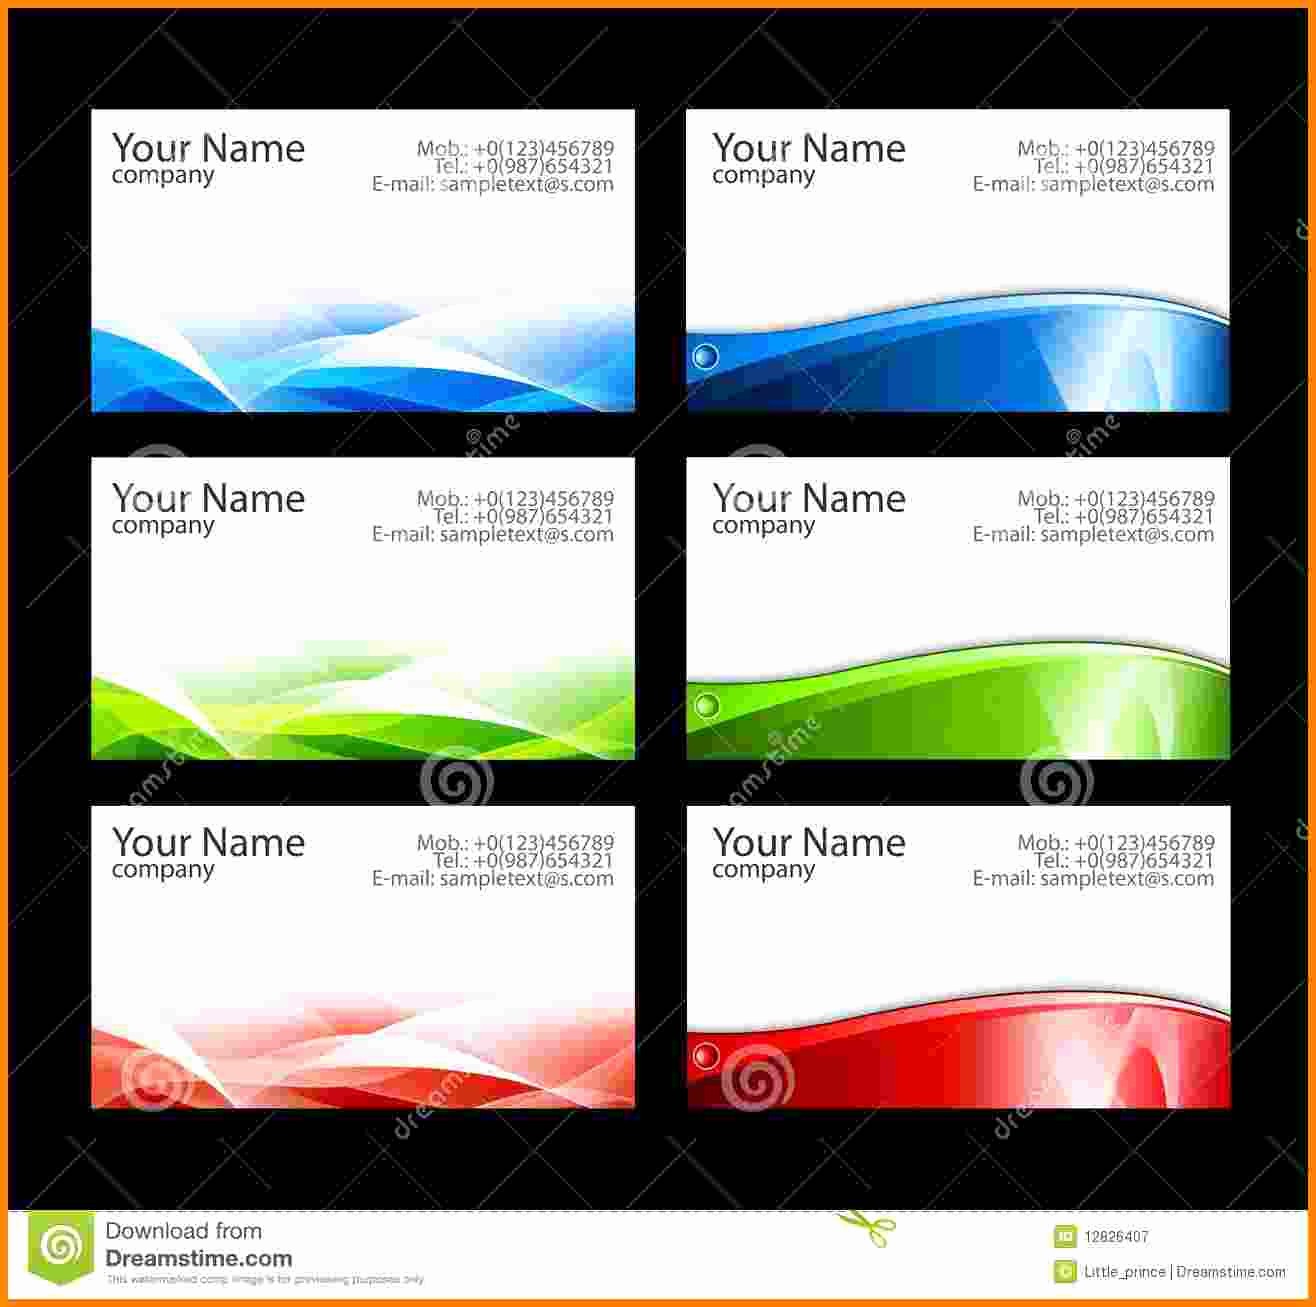 Business Cards Samples Free Download Luxury 9 Blank Business Card Template Illustrator